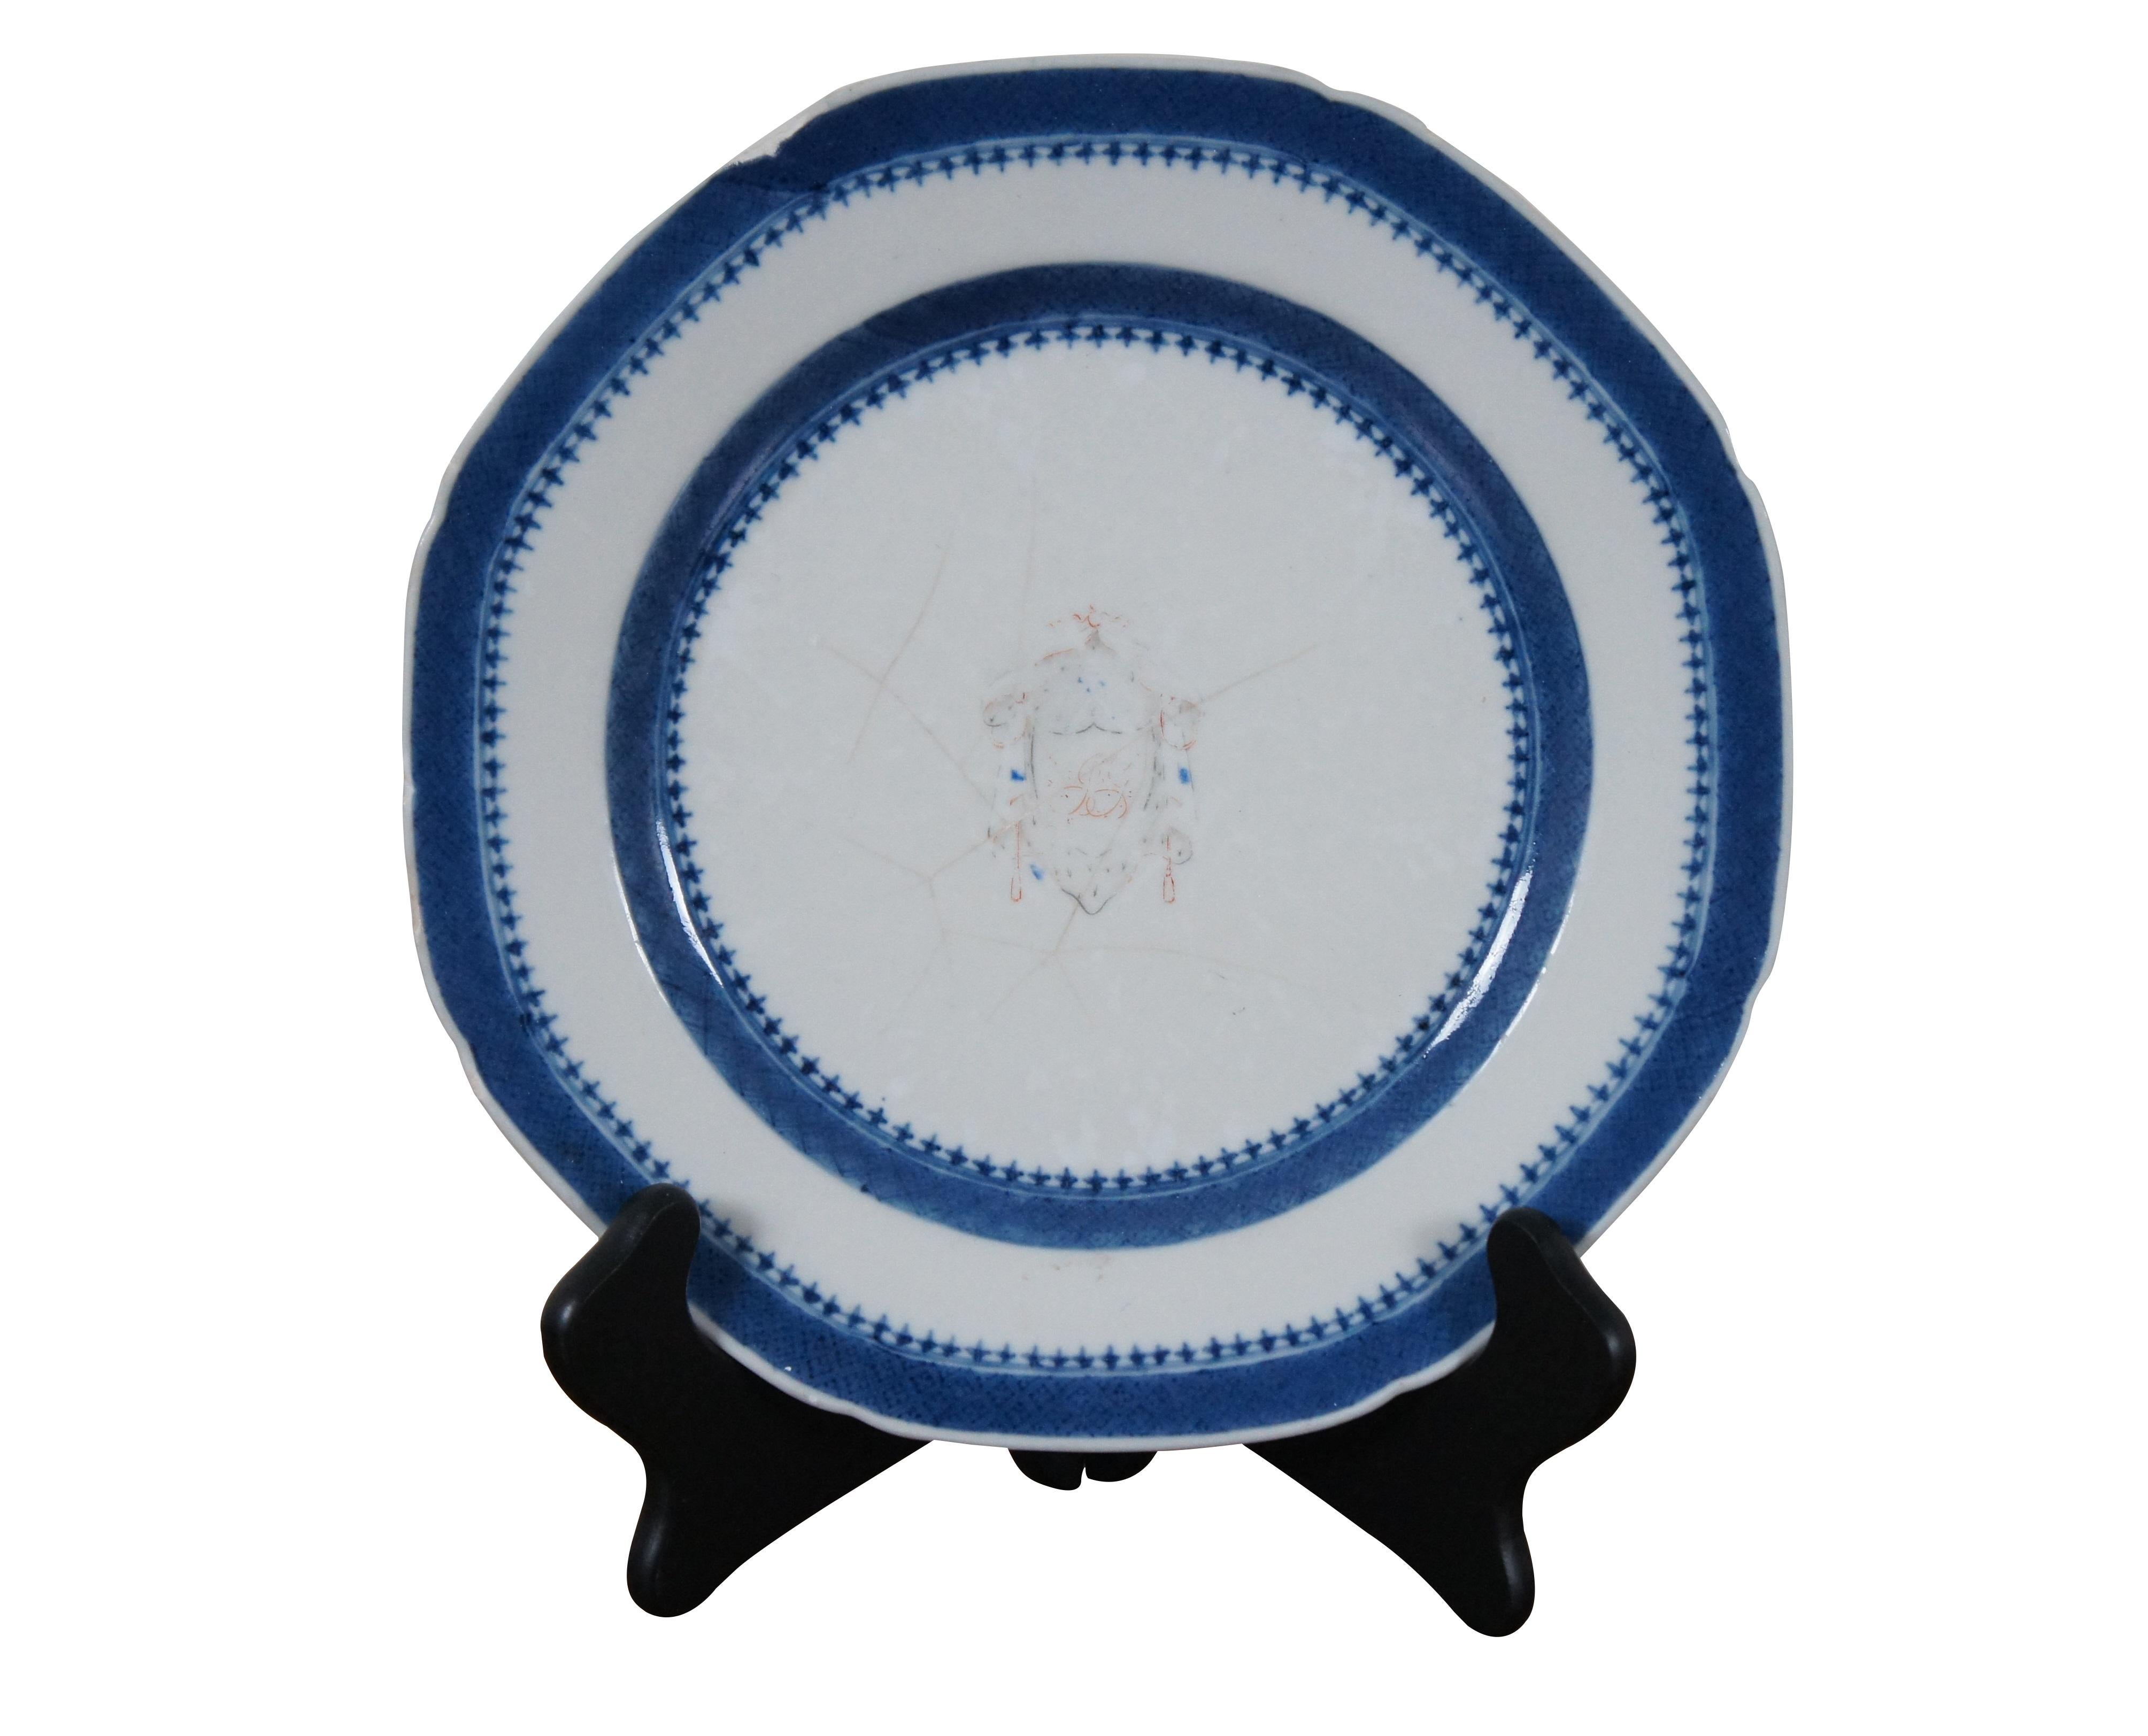 Pair of 18th century Chinese Export porcelain plates featuring slightly scalloped edges, hand painted blue and white borders and armorial crest / coat of arms at the center. Includes two folding stands for display.

Dimensions:
9.5